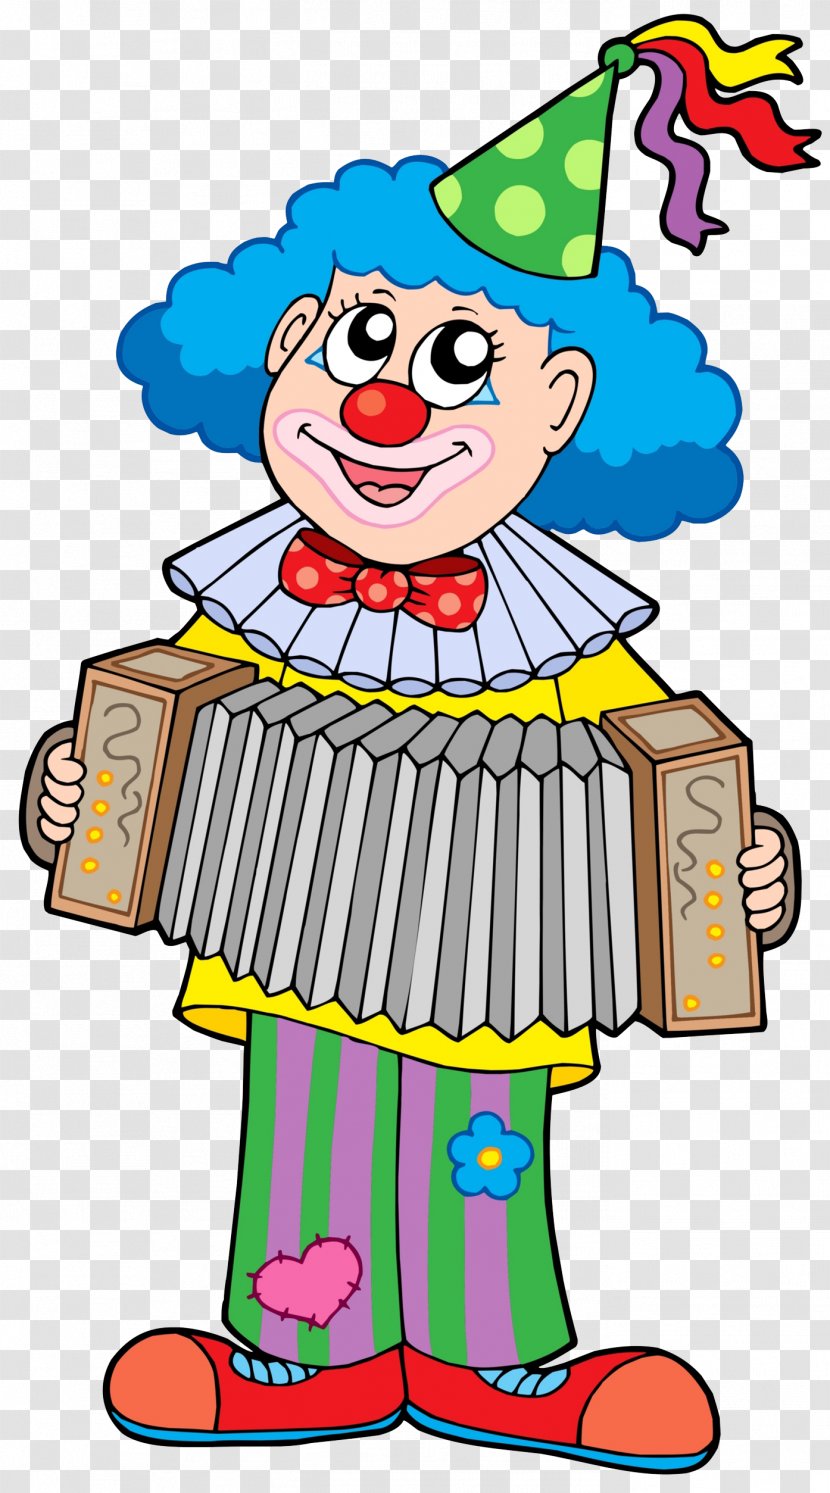 Clown Royalty-free Stock Illustration Clip Art - Profession - Play The Transparent PNG